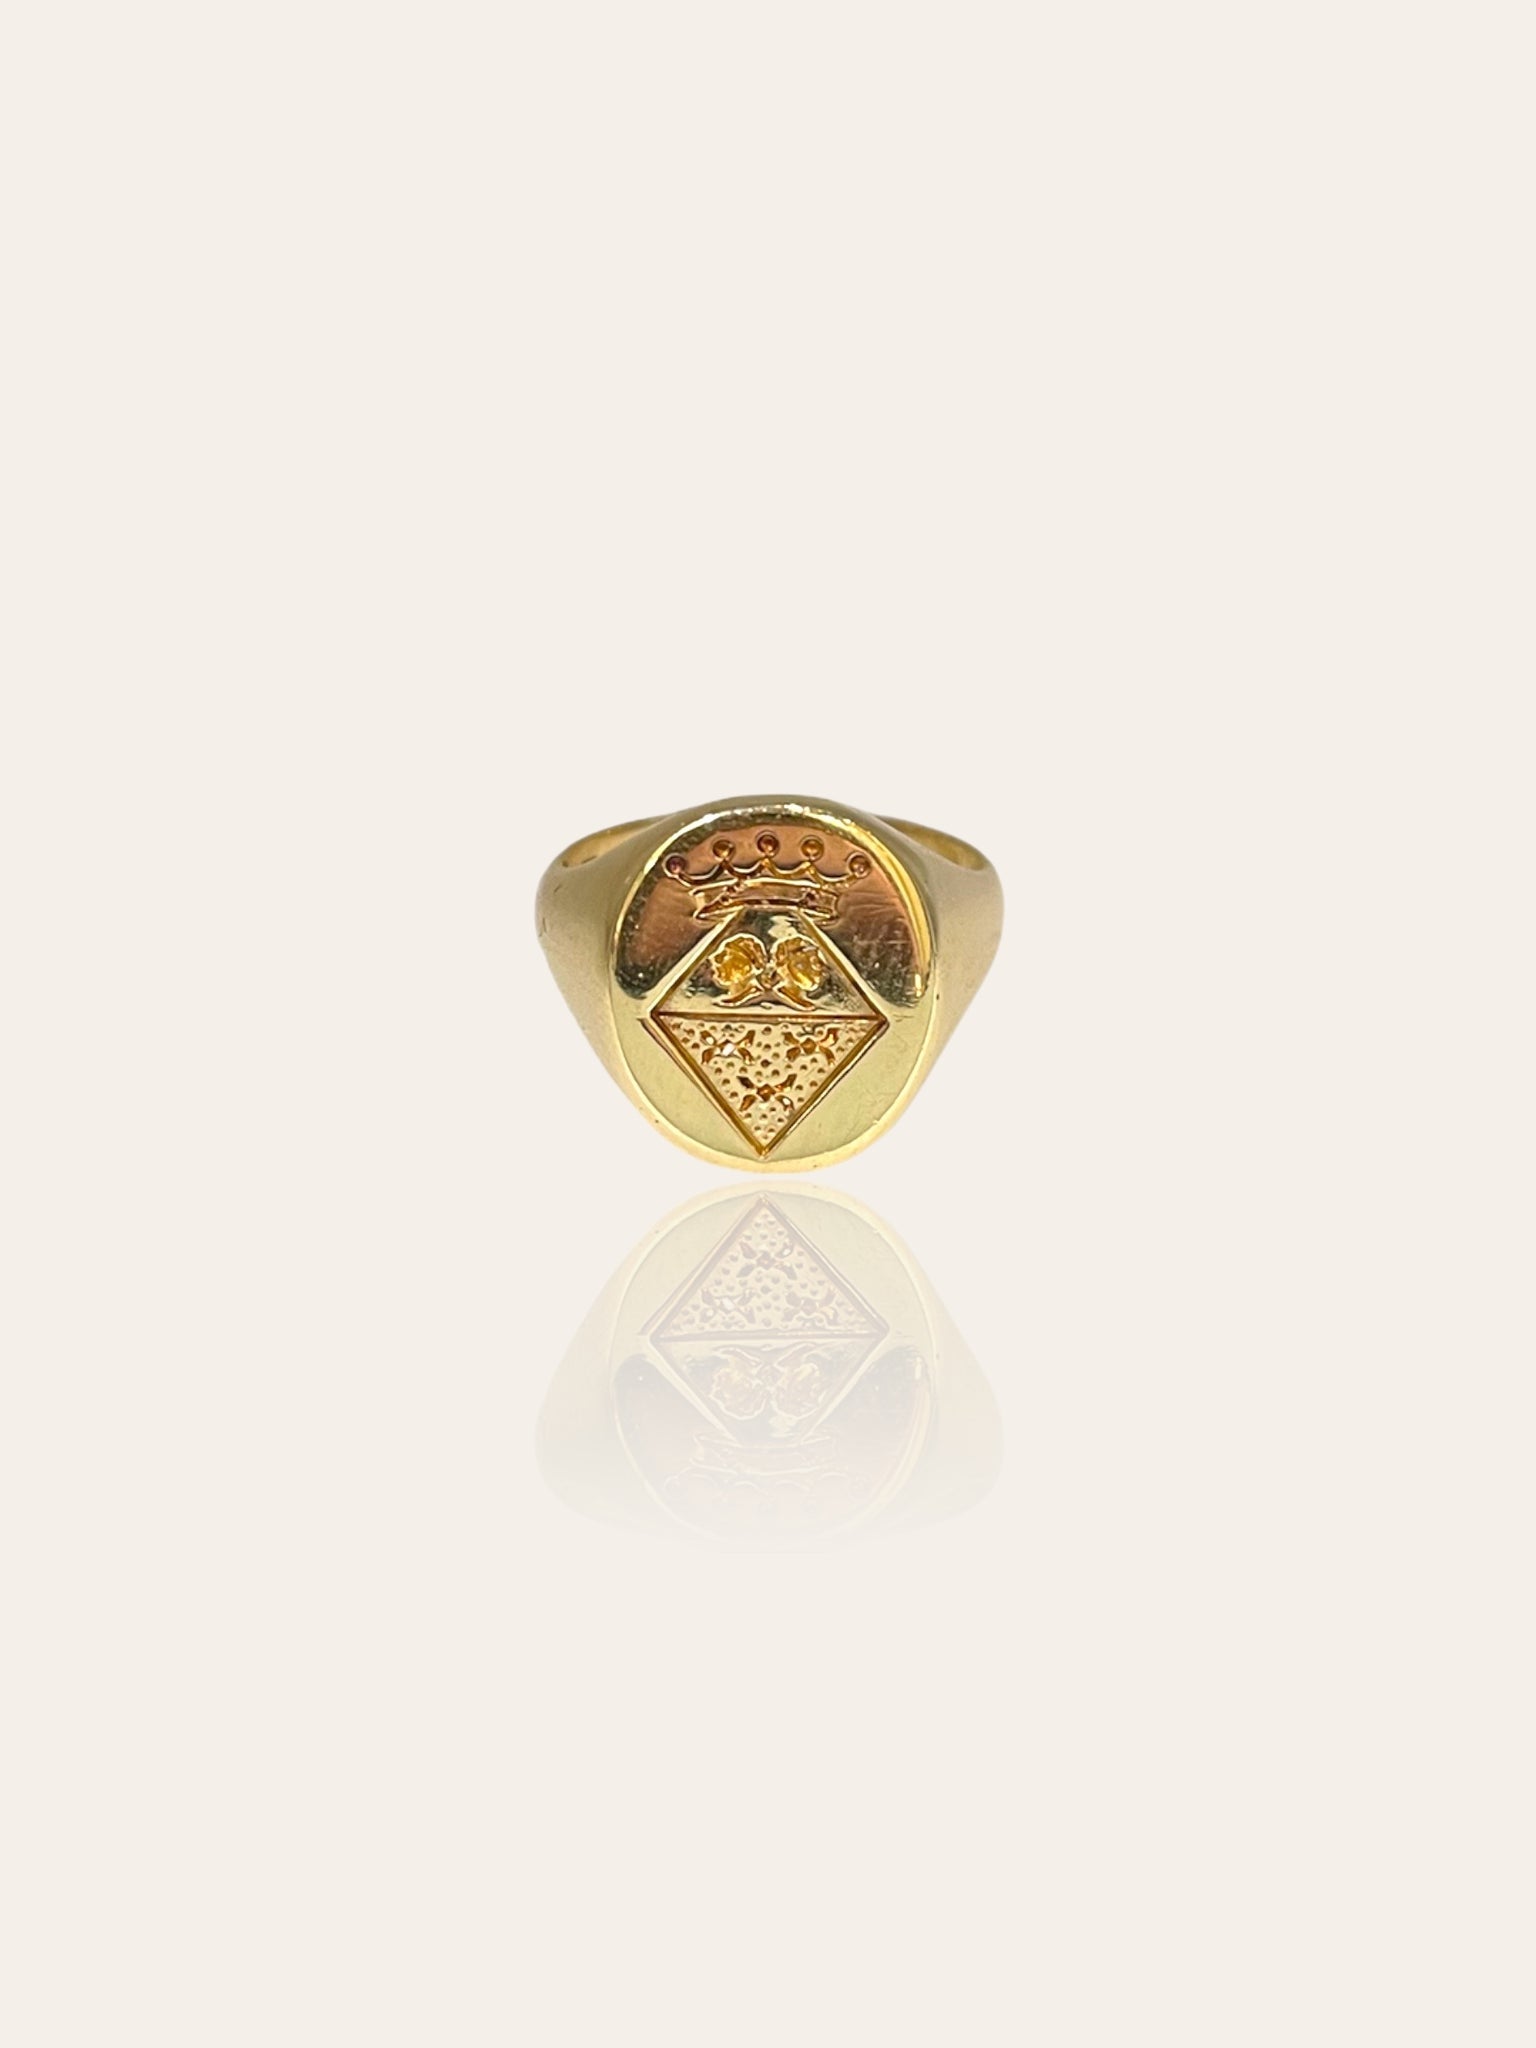 Solid Yellow gold 14K Cachet ring with engravings